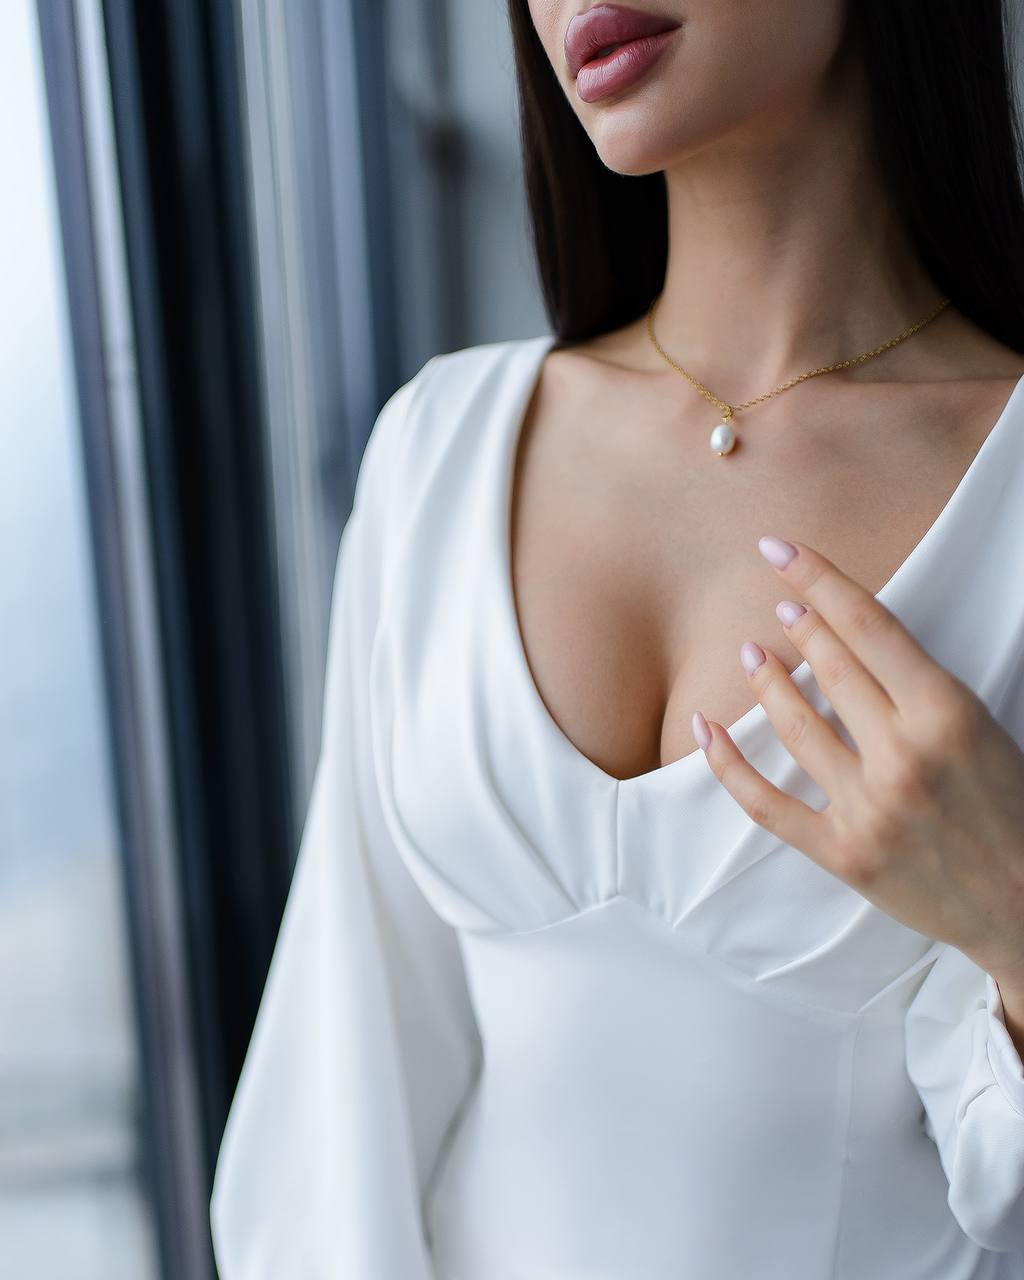 a woman in a white dress with a pearl necklace